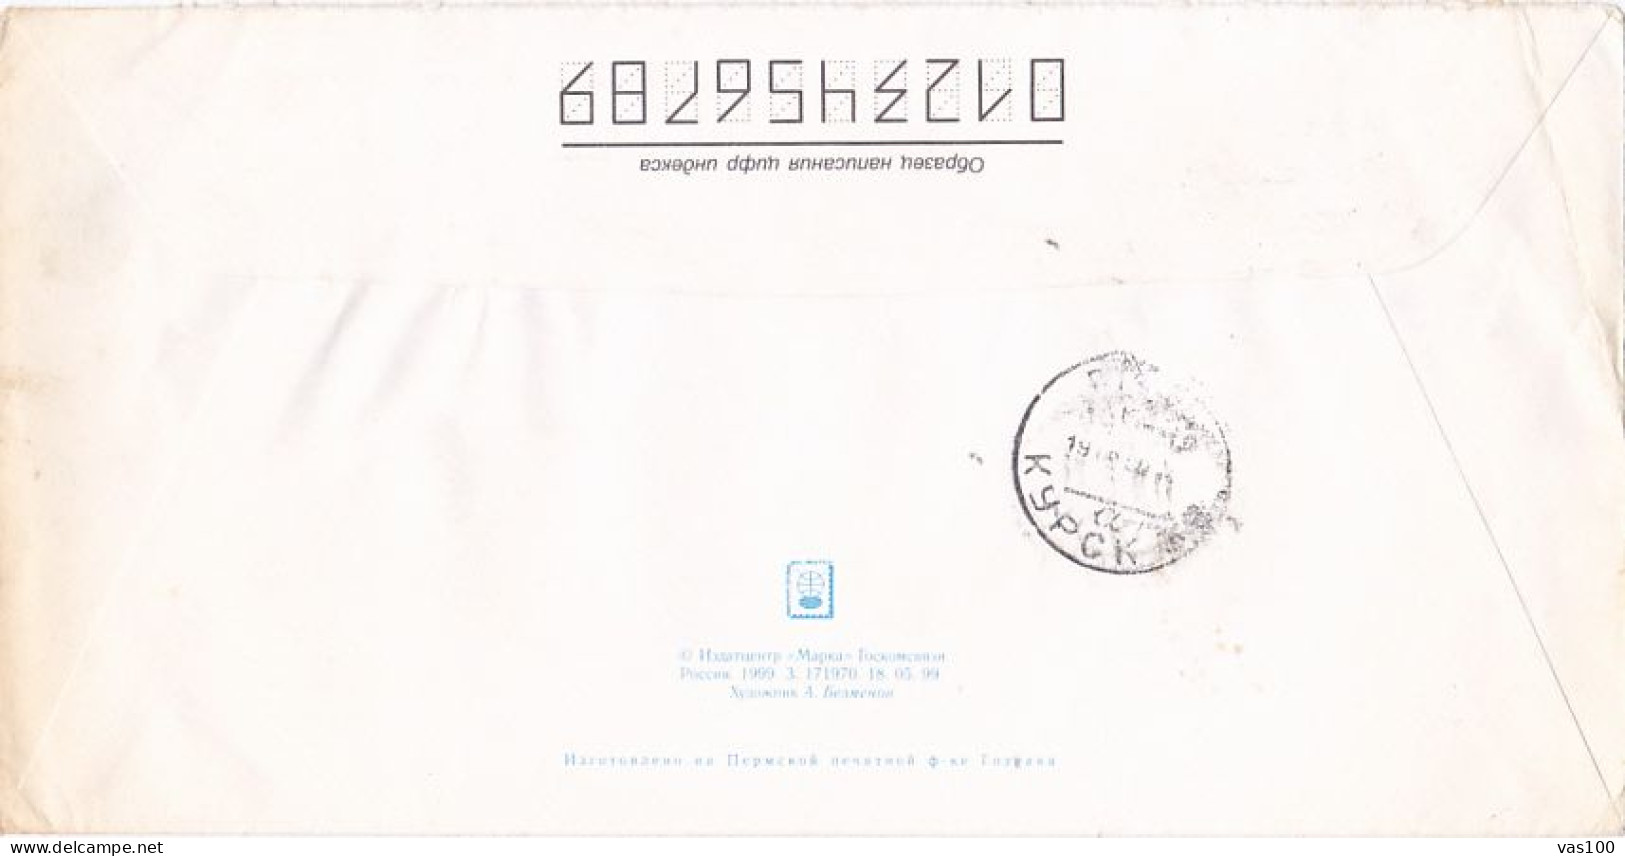 PHILATELY, STAMPS, COVER STATIONERY, ENTIER POSTAL, 1999, RUSSIA - Interi Postali